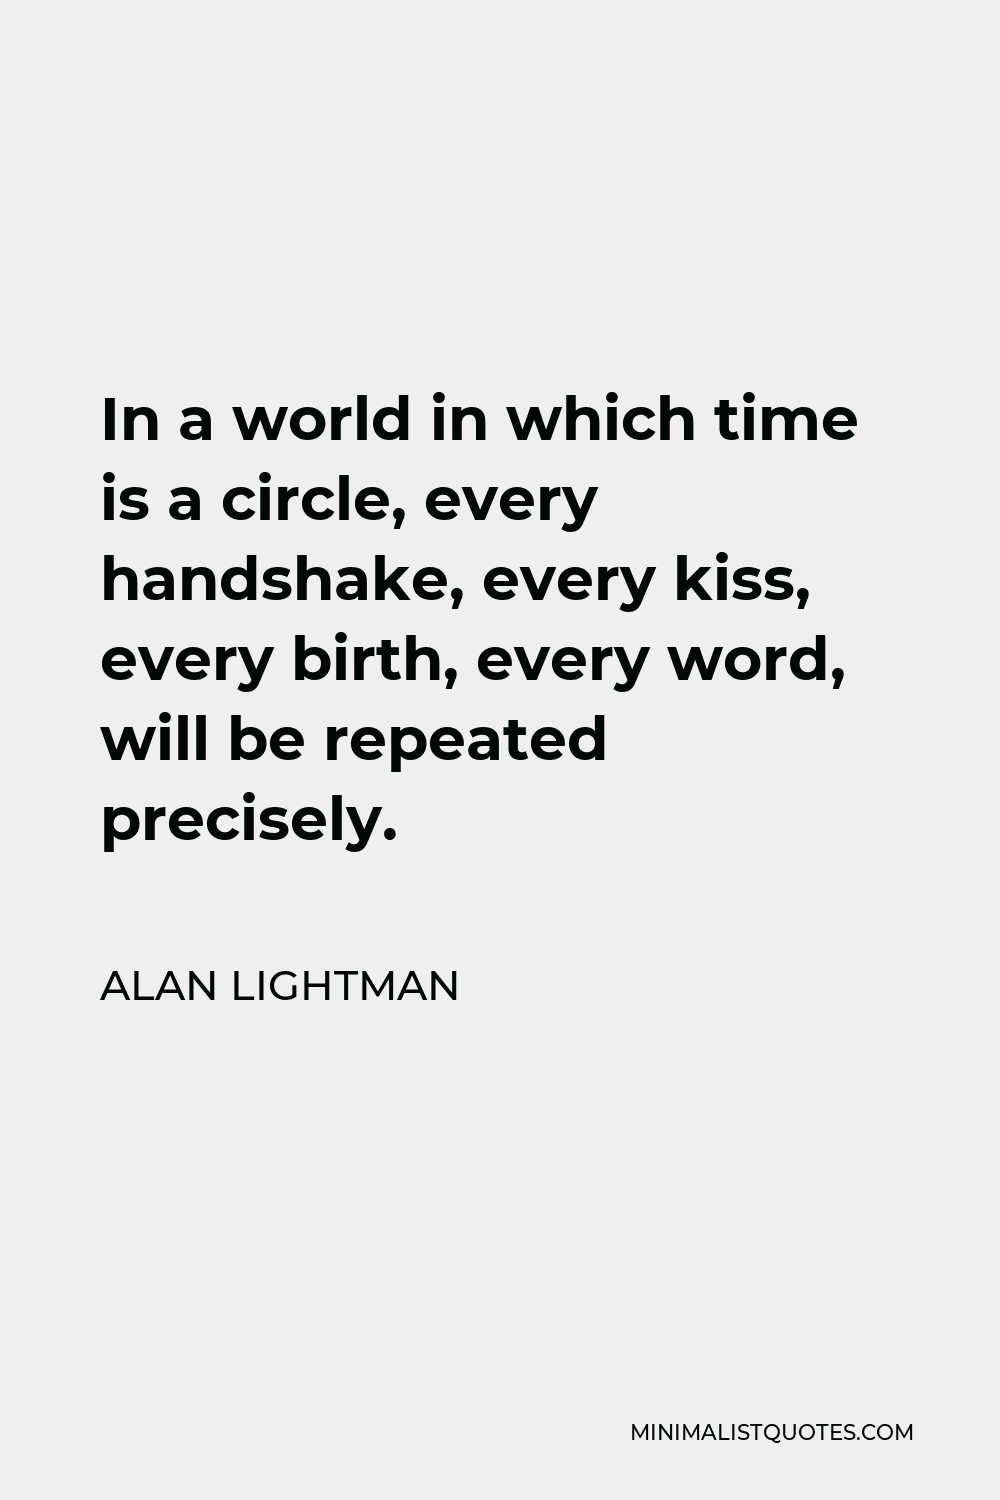 Alan Lightman Quote - In a world in which time is a circle, every handshake, every kiss, every birth, every word, will be repeated precisely.